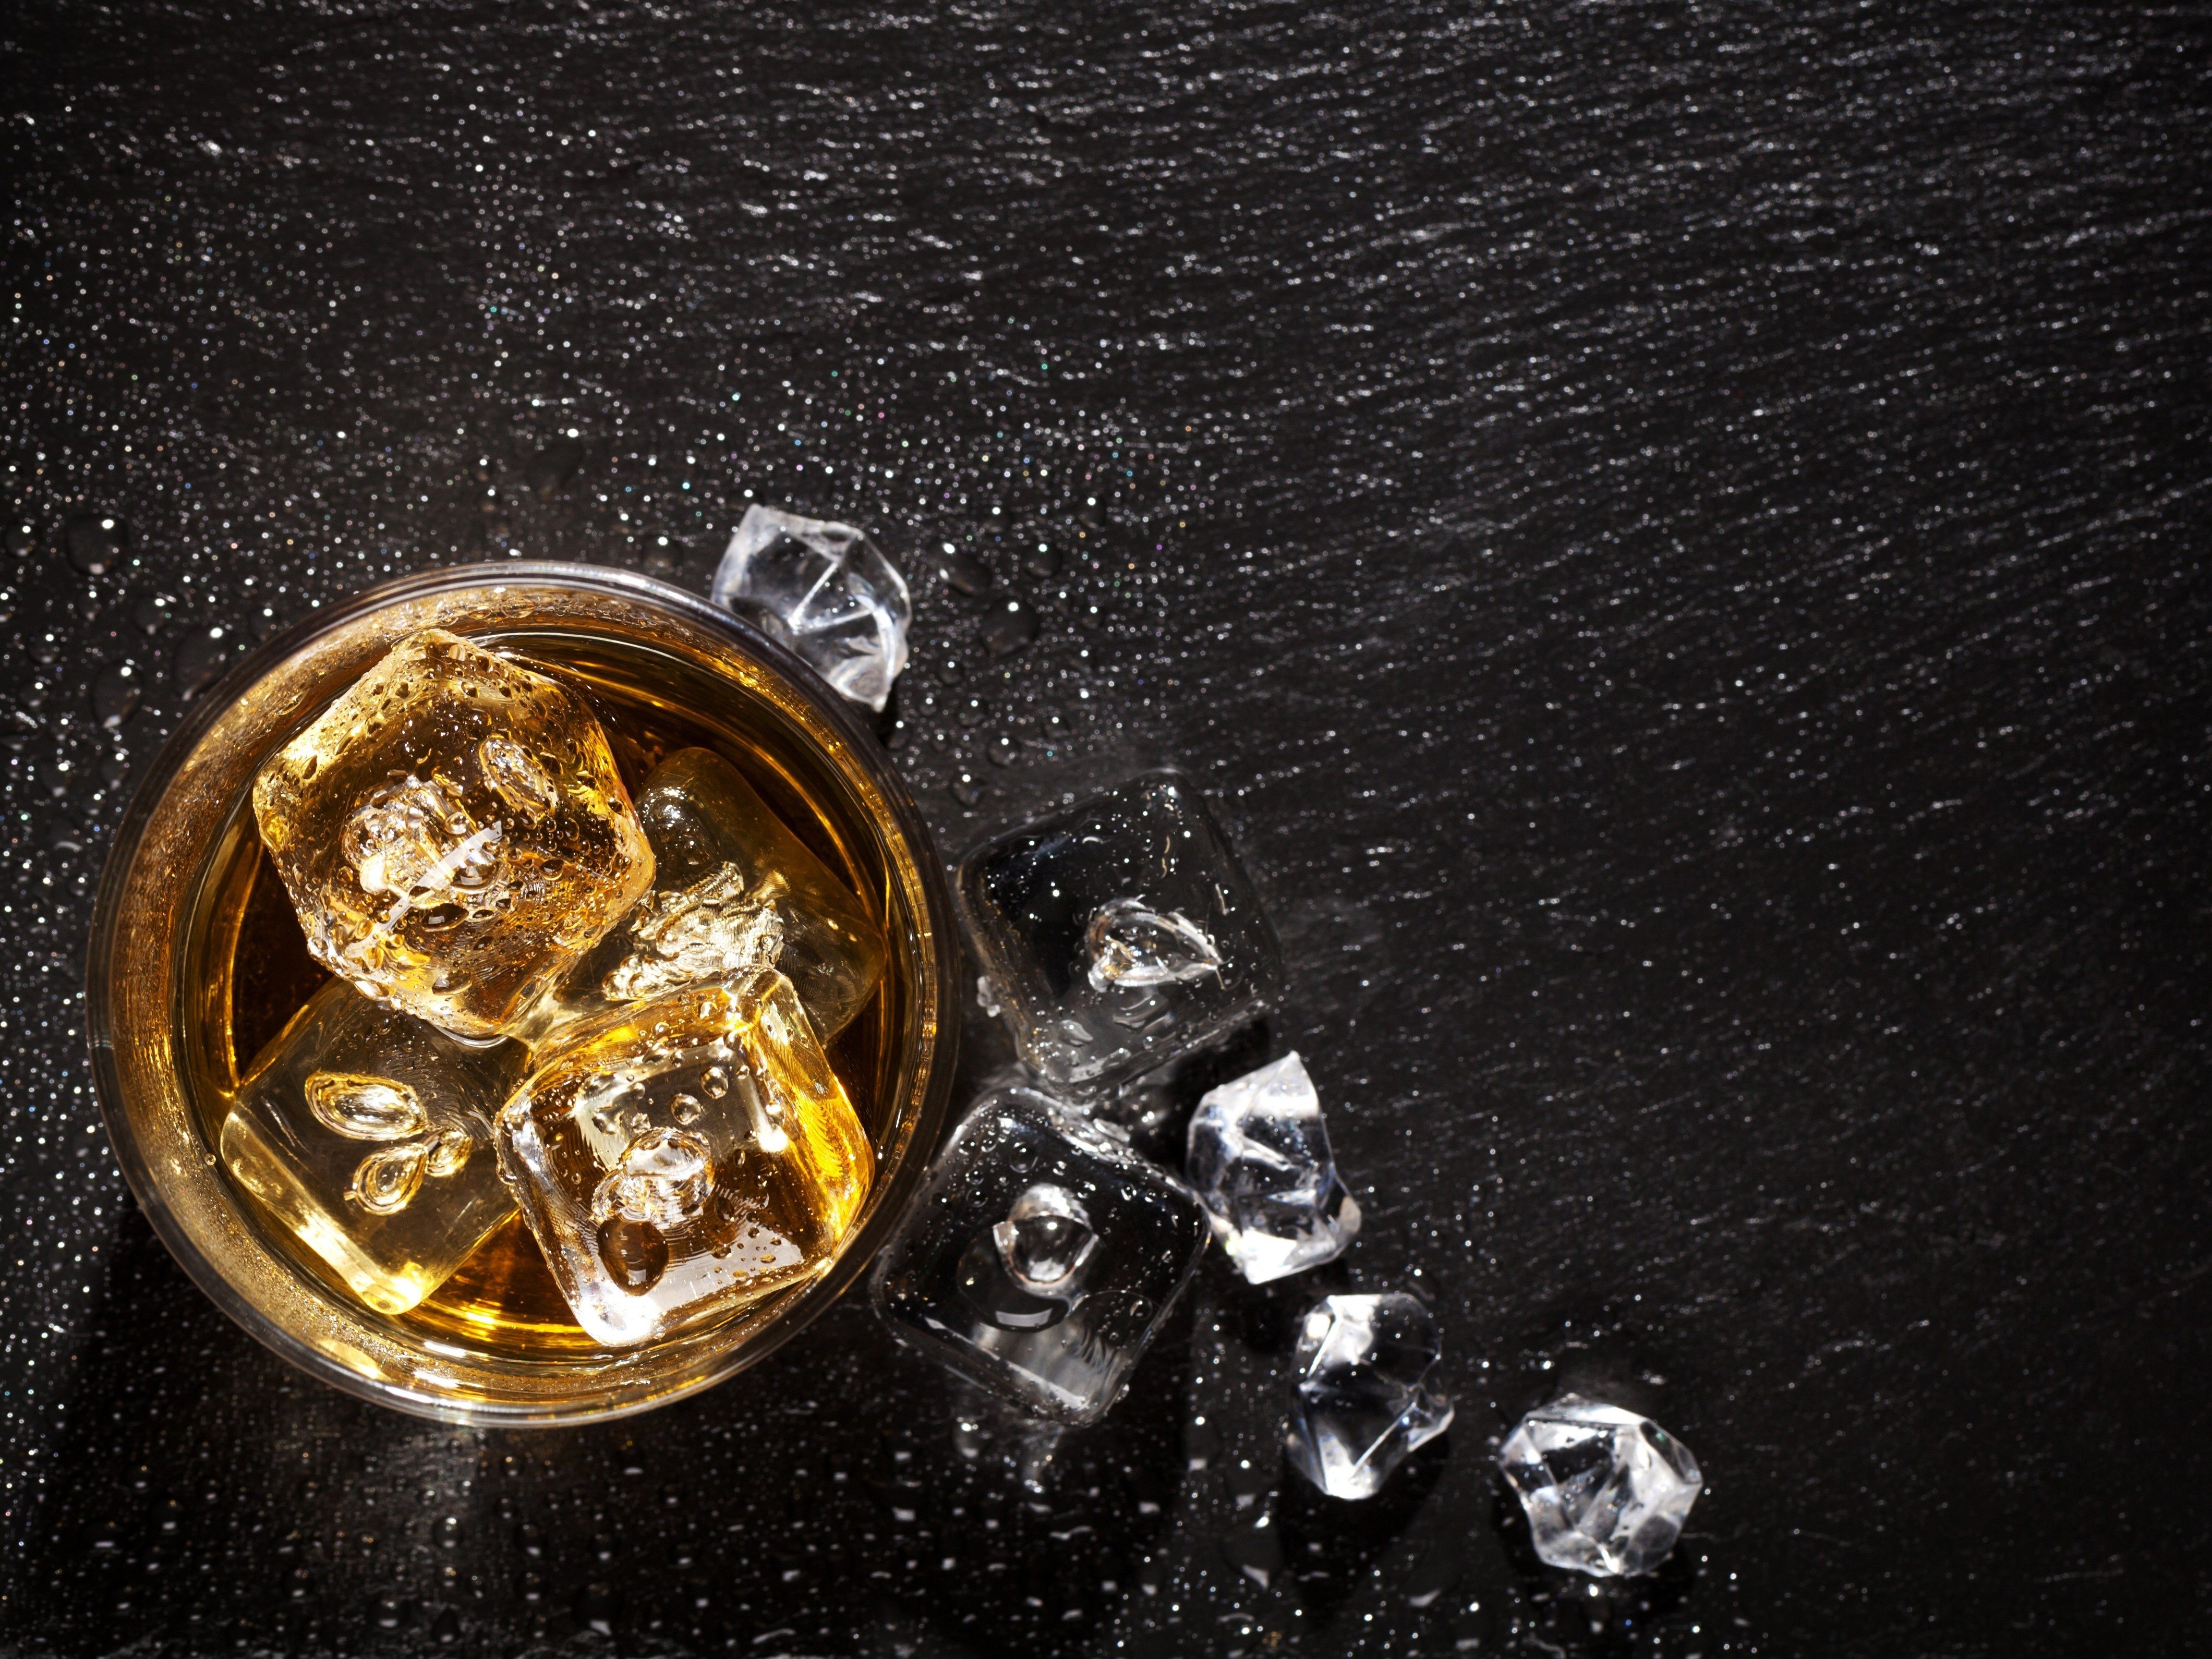 1. Whisky on the rocks is perfectly acceptable.